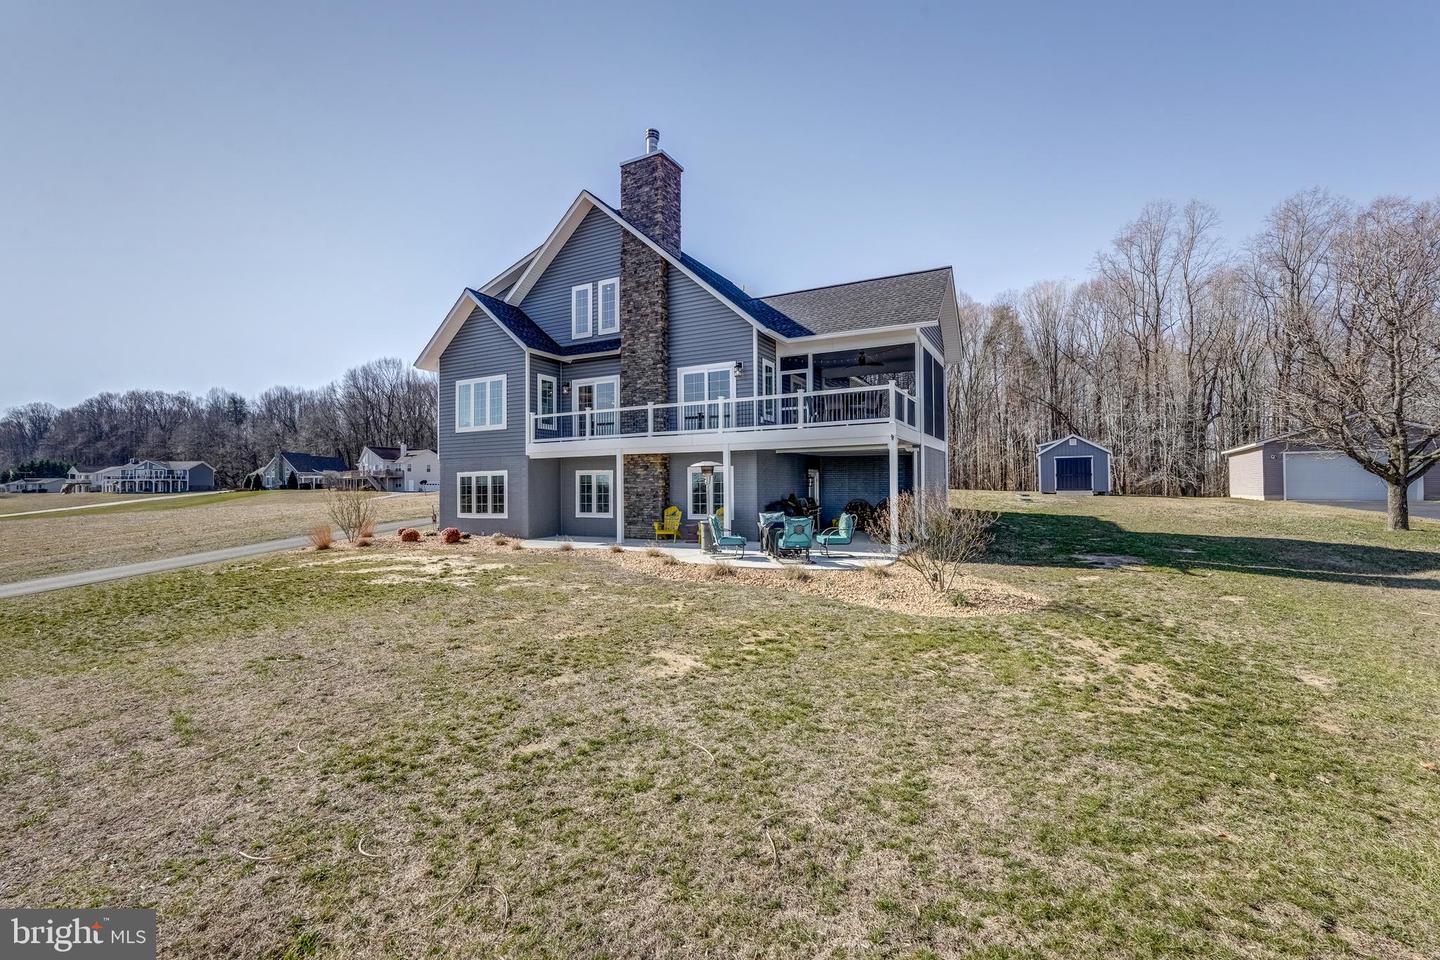 475 SECLUSION SHORES DR, MINERAL, Virginia 23117, 5 Bedrooms Bedrooms, 15 Rooms Rooms,3 BathroomsBathrooms,Residential,For sale,475 SECLUSION SHORES DR,VALA2005168 MLS # VALA2005168